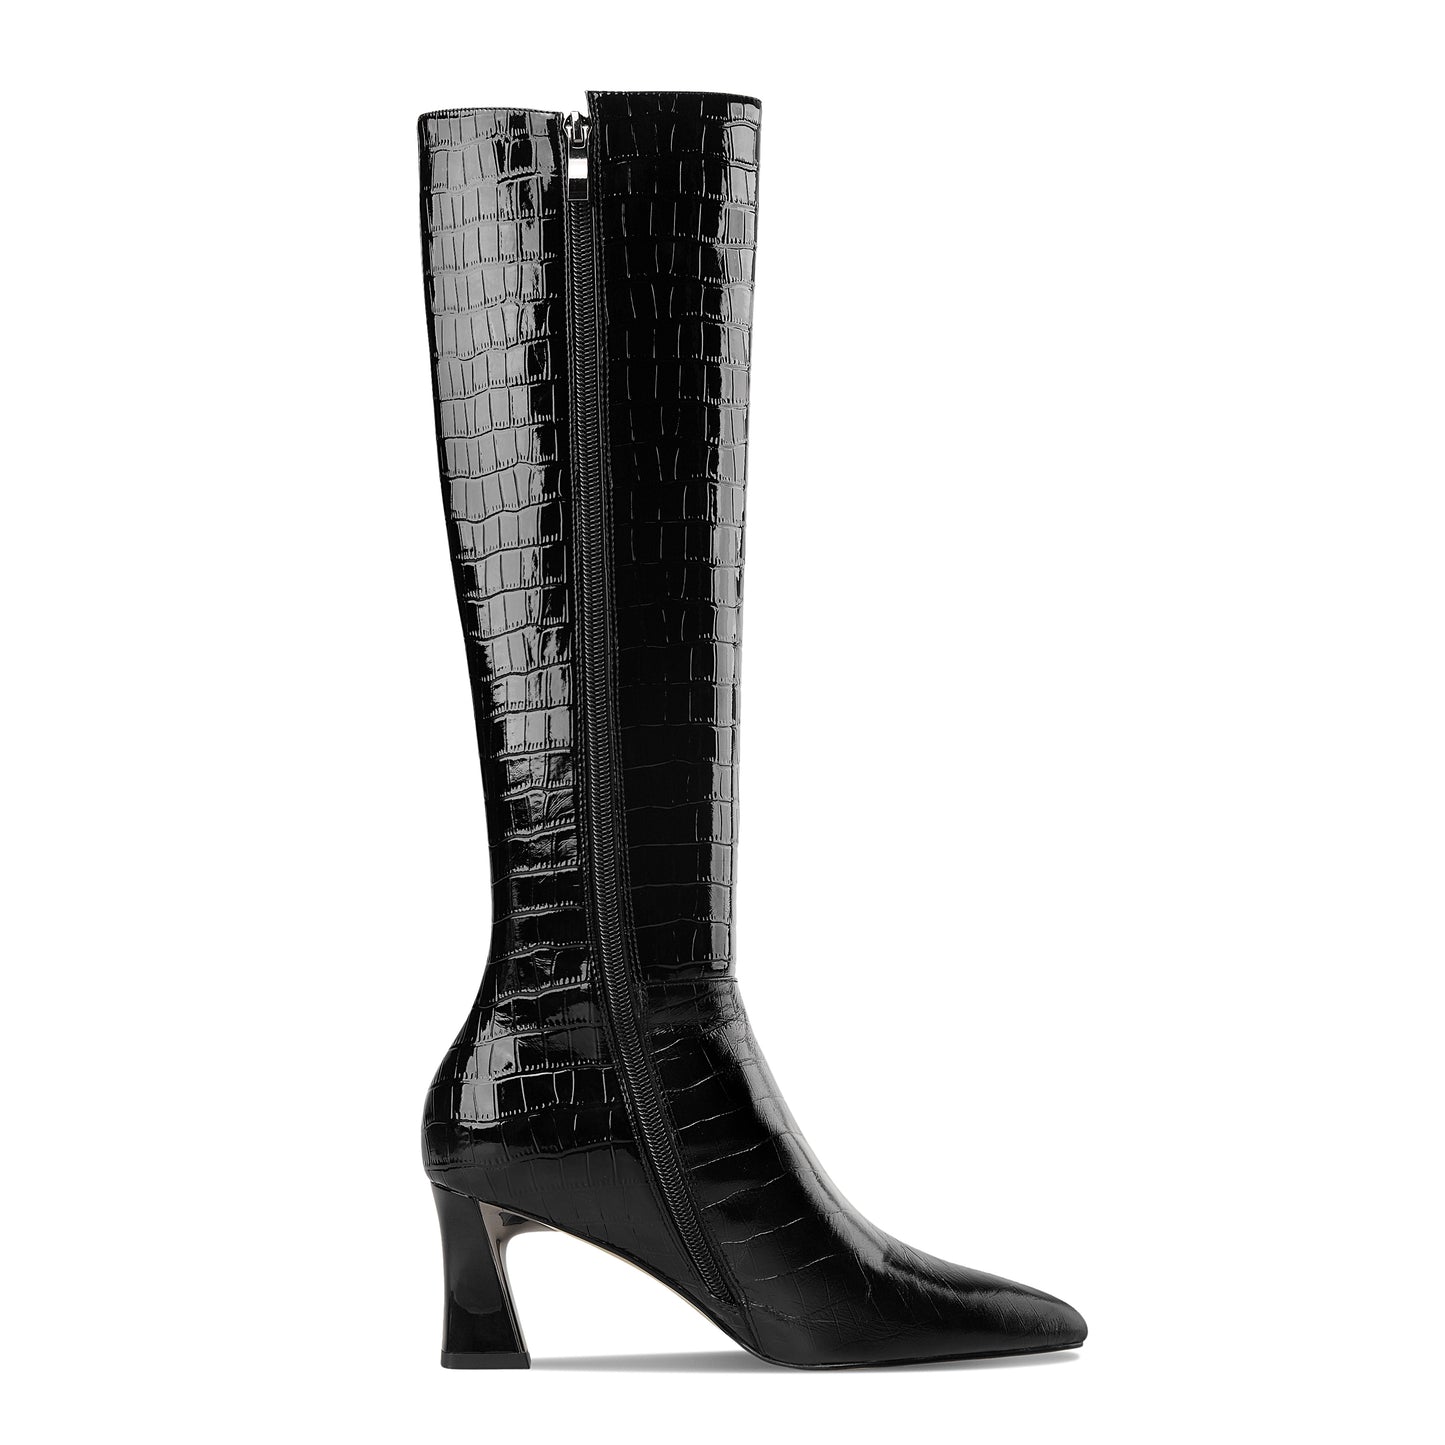 TinaCus Women's Handmade Embossed Genuine Leather Clear Pointed Toe Mid Spool Heel Side Zip Up Classic Black Knee High Boots